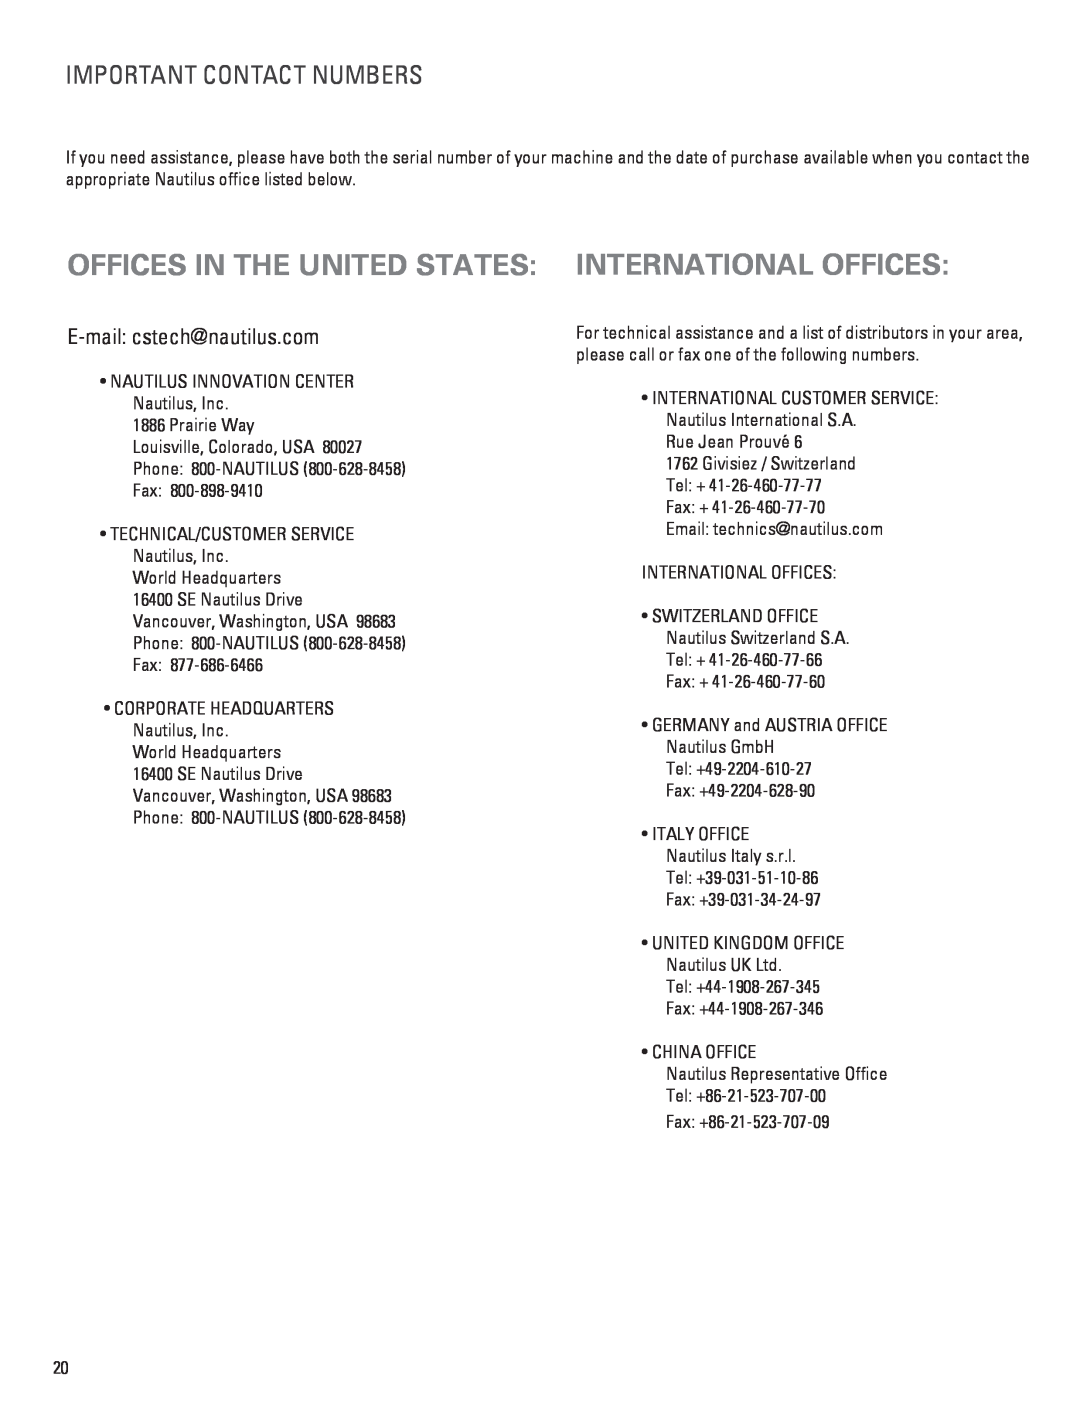 Bowflex 001-6961 manual Offices In The United States International Offices, Important Contact Numbers 